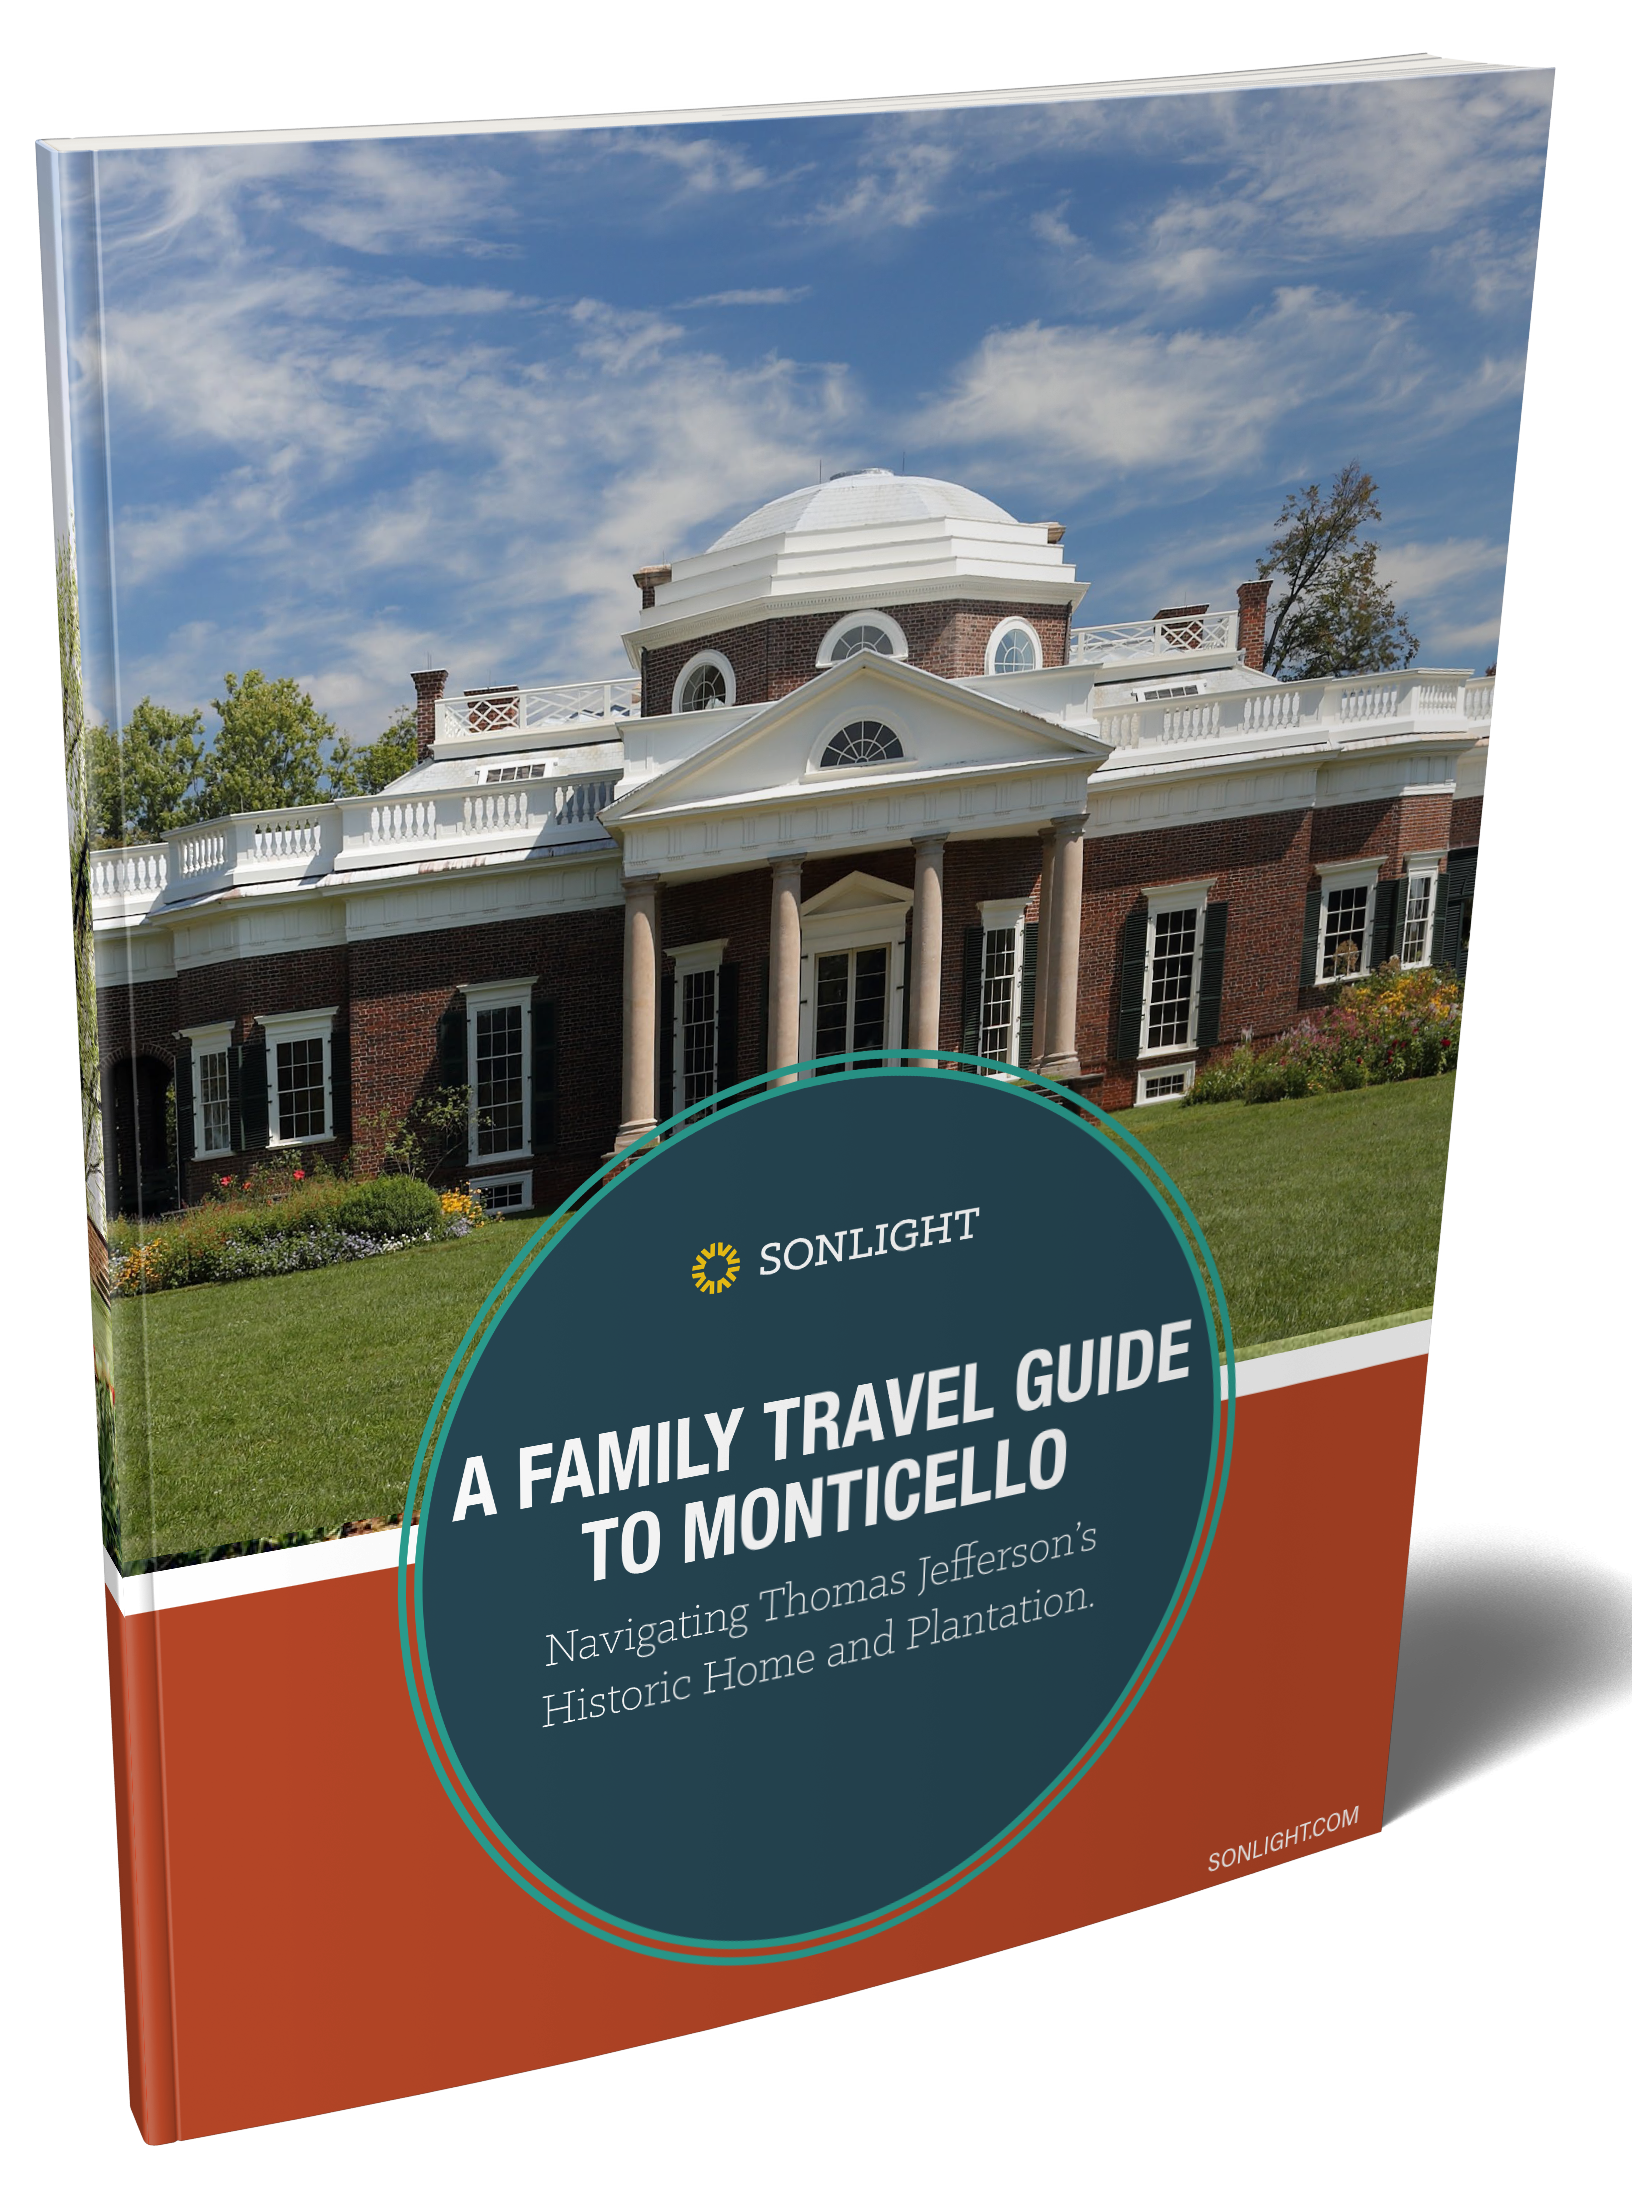 Navigating Thomas Jefferson's Monticello - Free Family Travel Guide from Sonlight